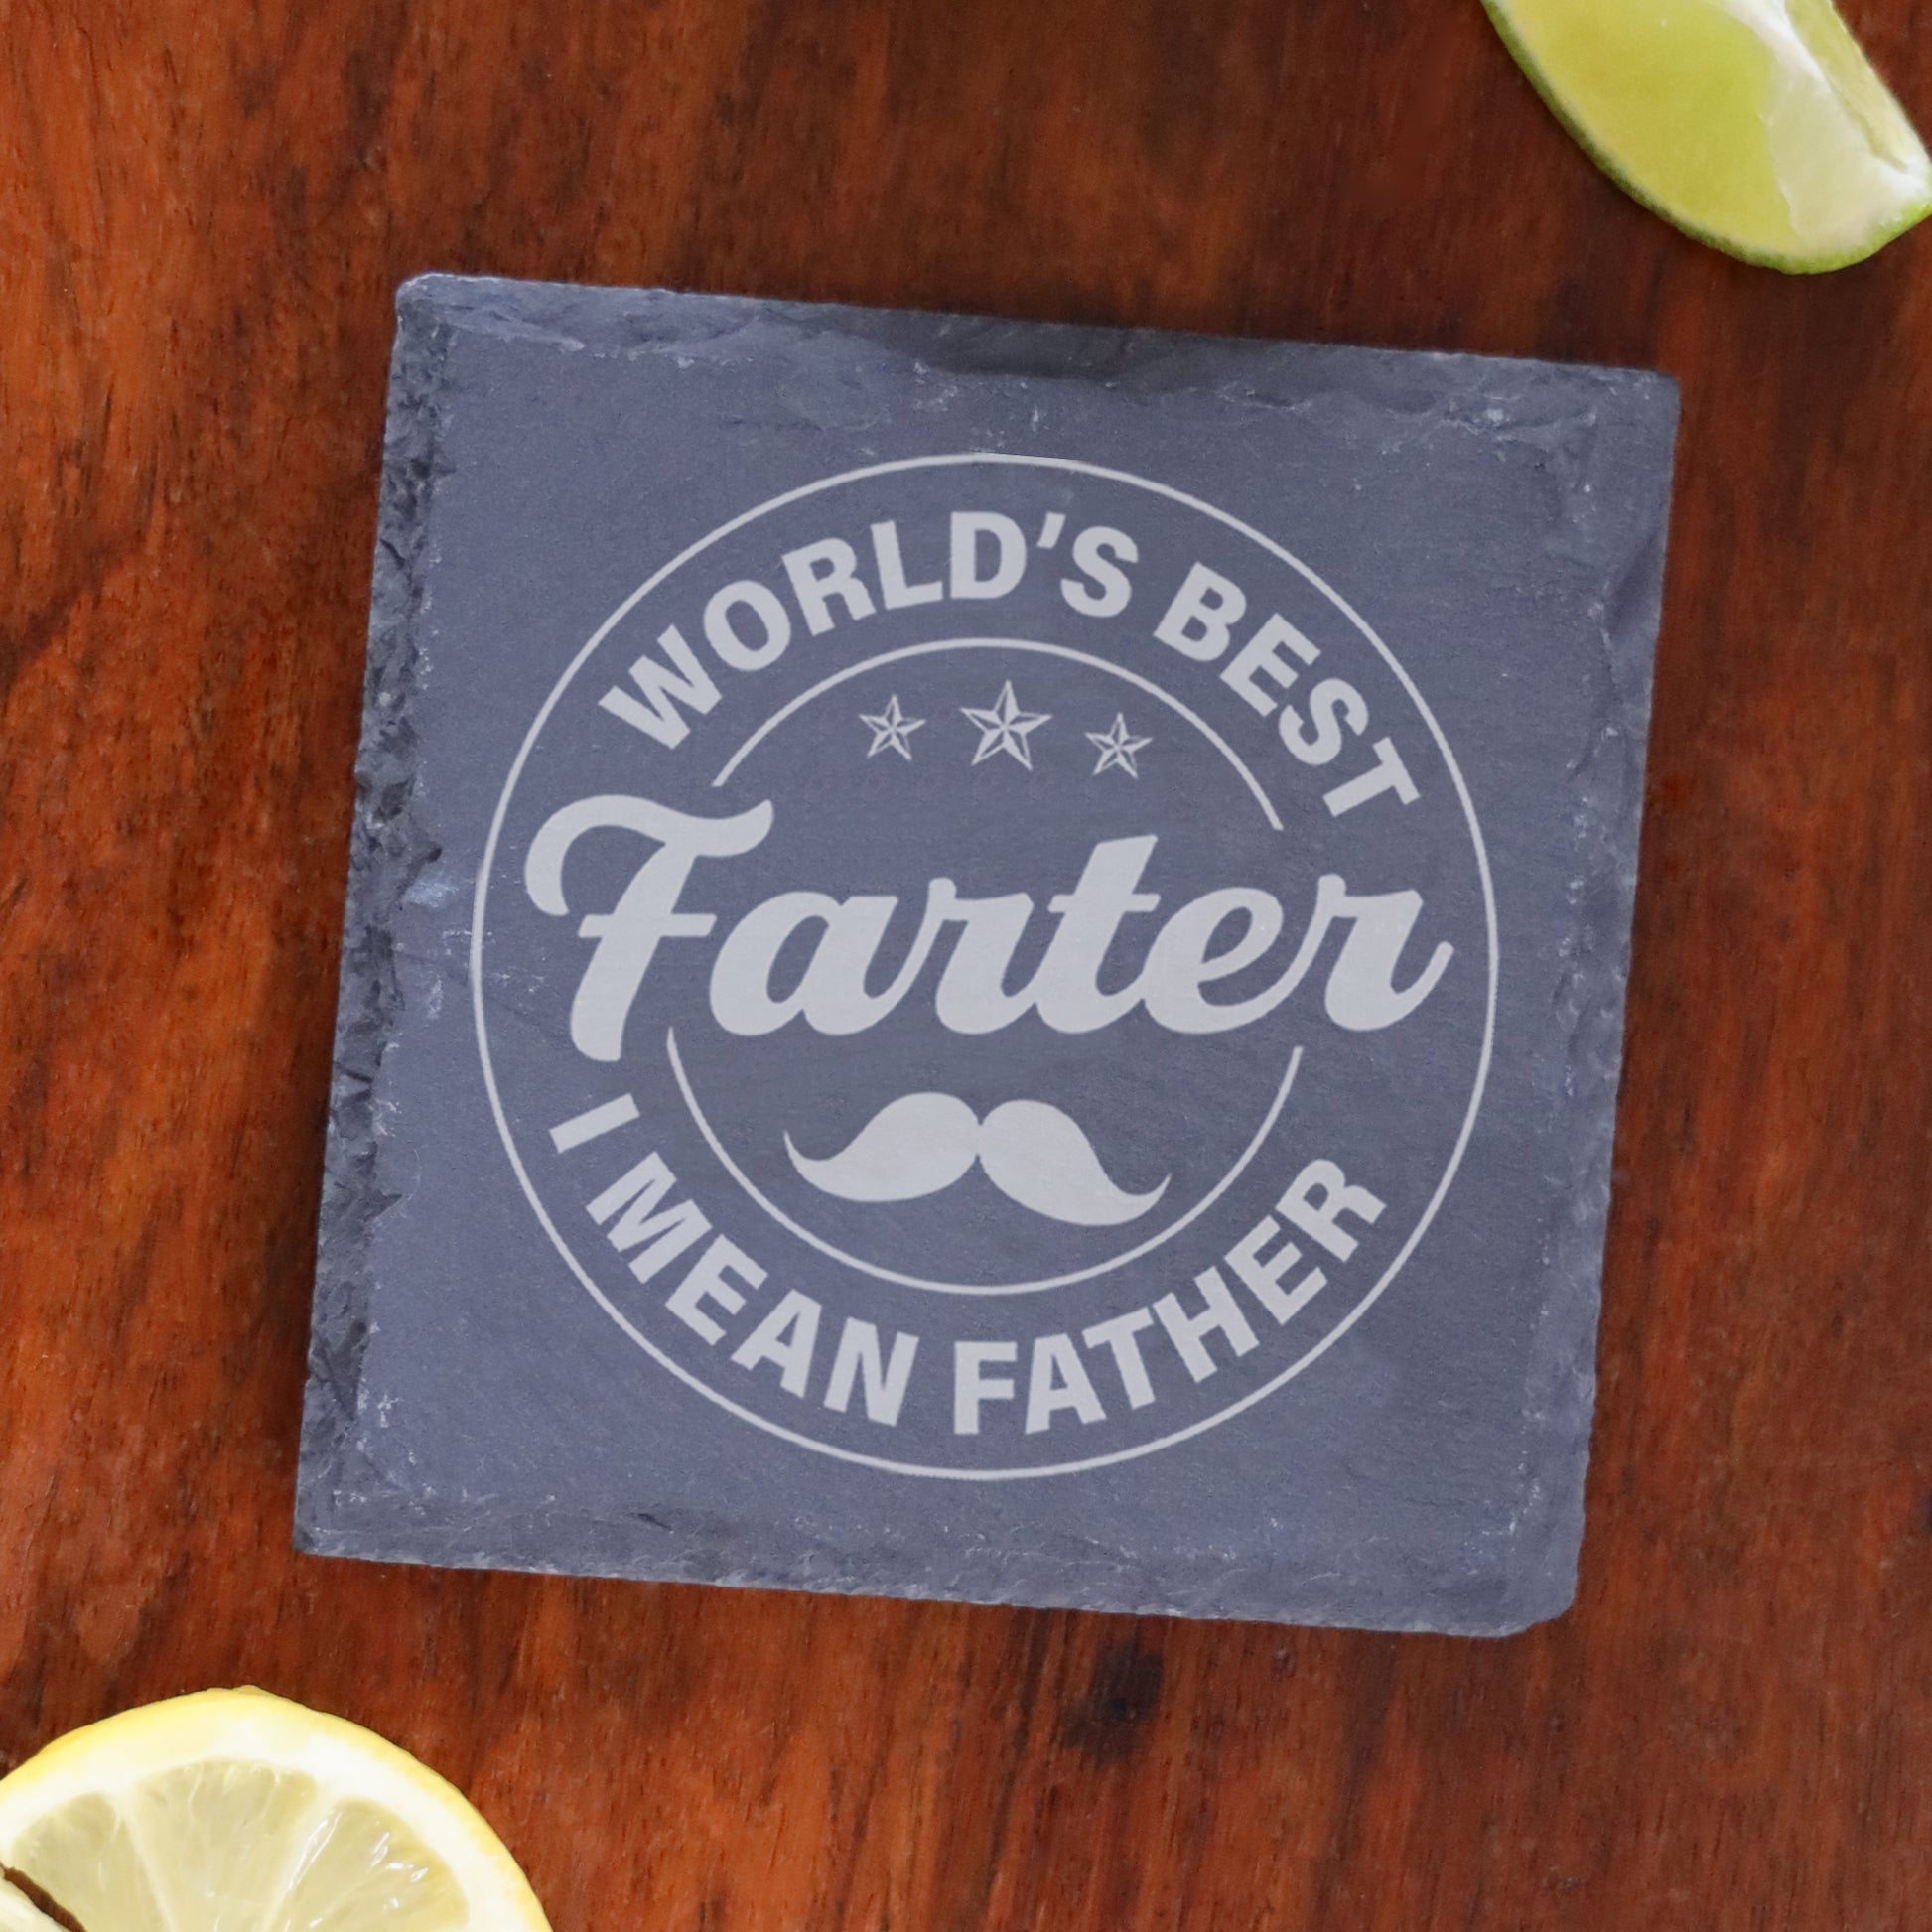 "Worlds Best Farter I Mean Father" Novelty Engraved Wine Glass and/or Coaster Set  - Always Looking Good - Square Coaster Only Circle Design 